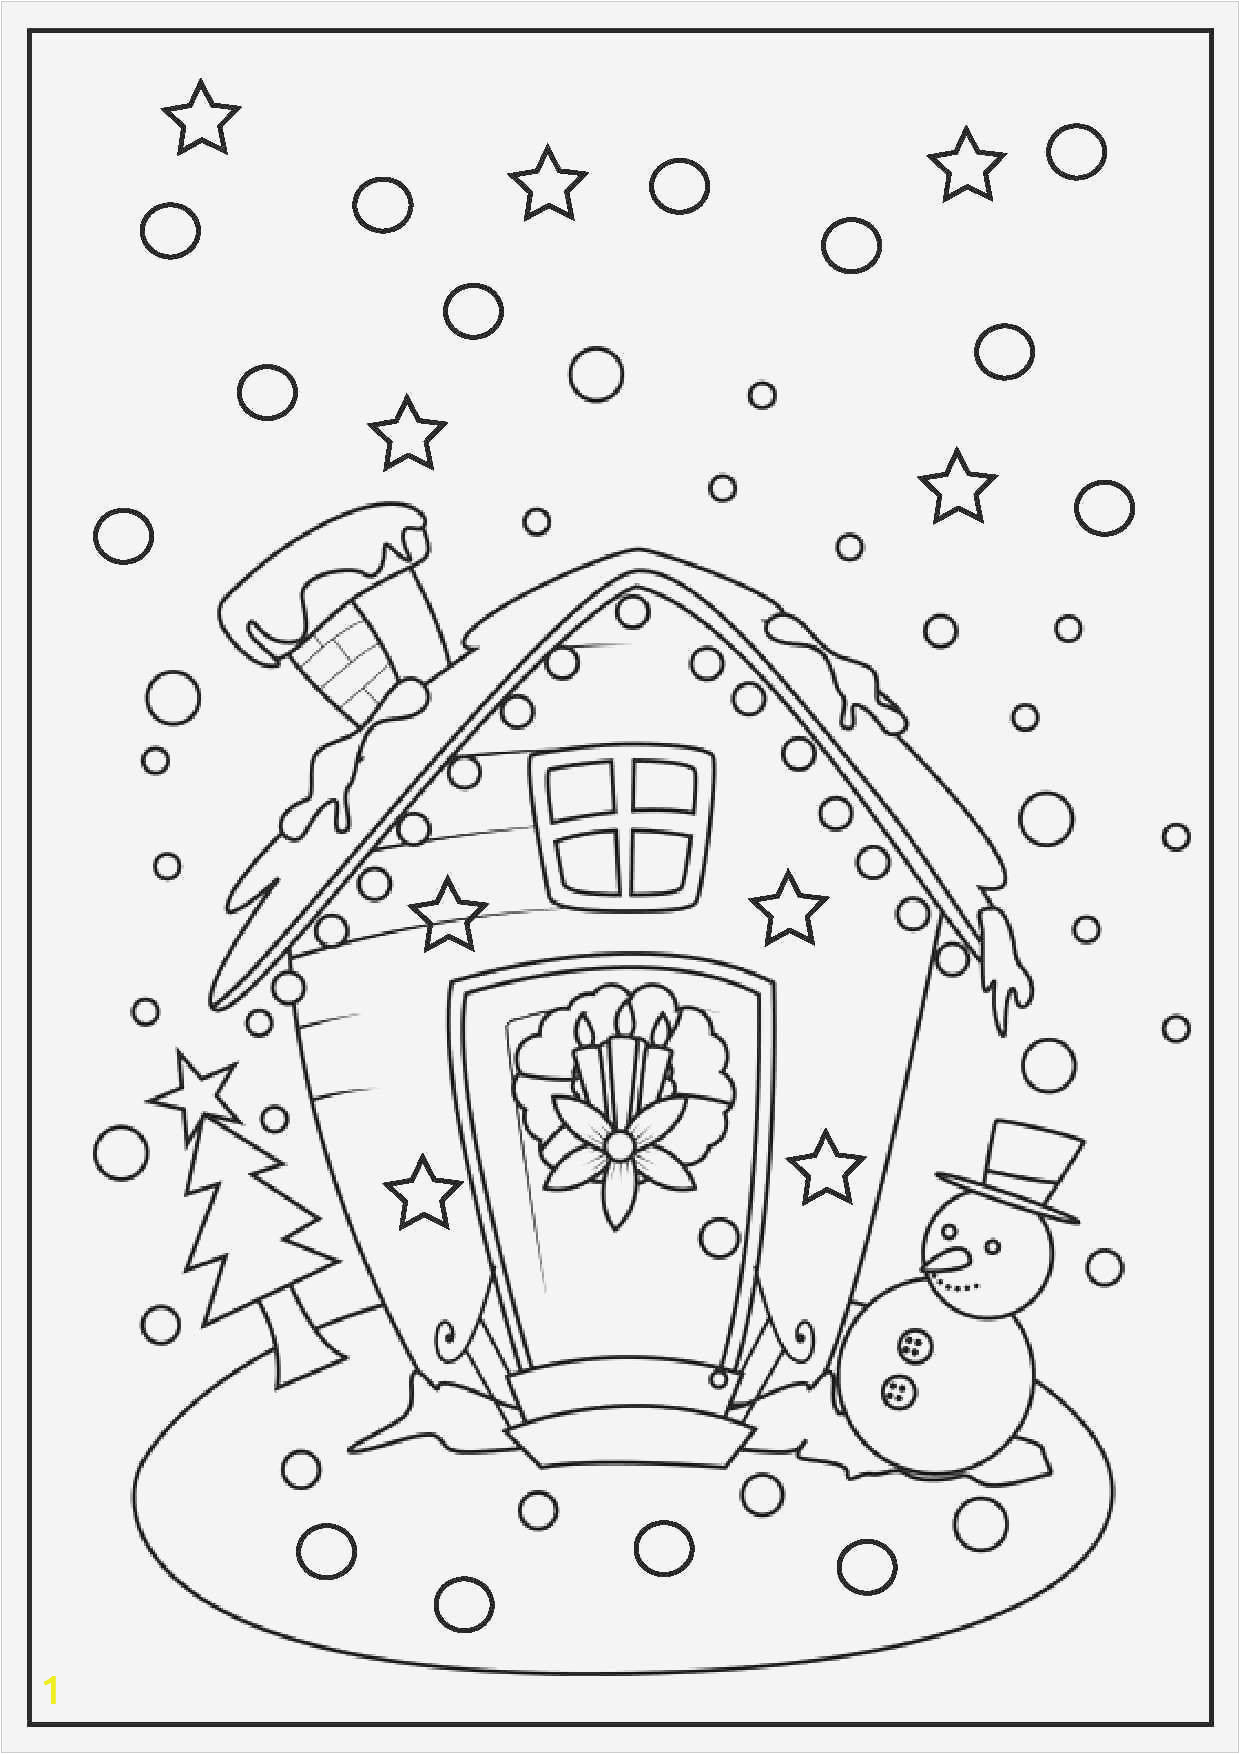 Free Printable Coloring Pages Of Halloween Coloring by Numbers